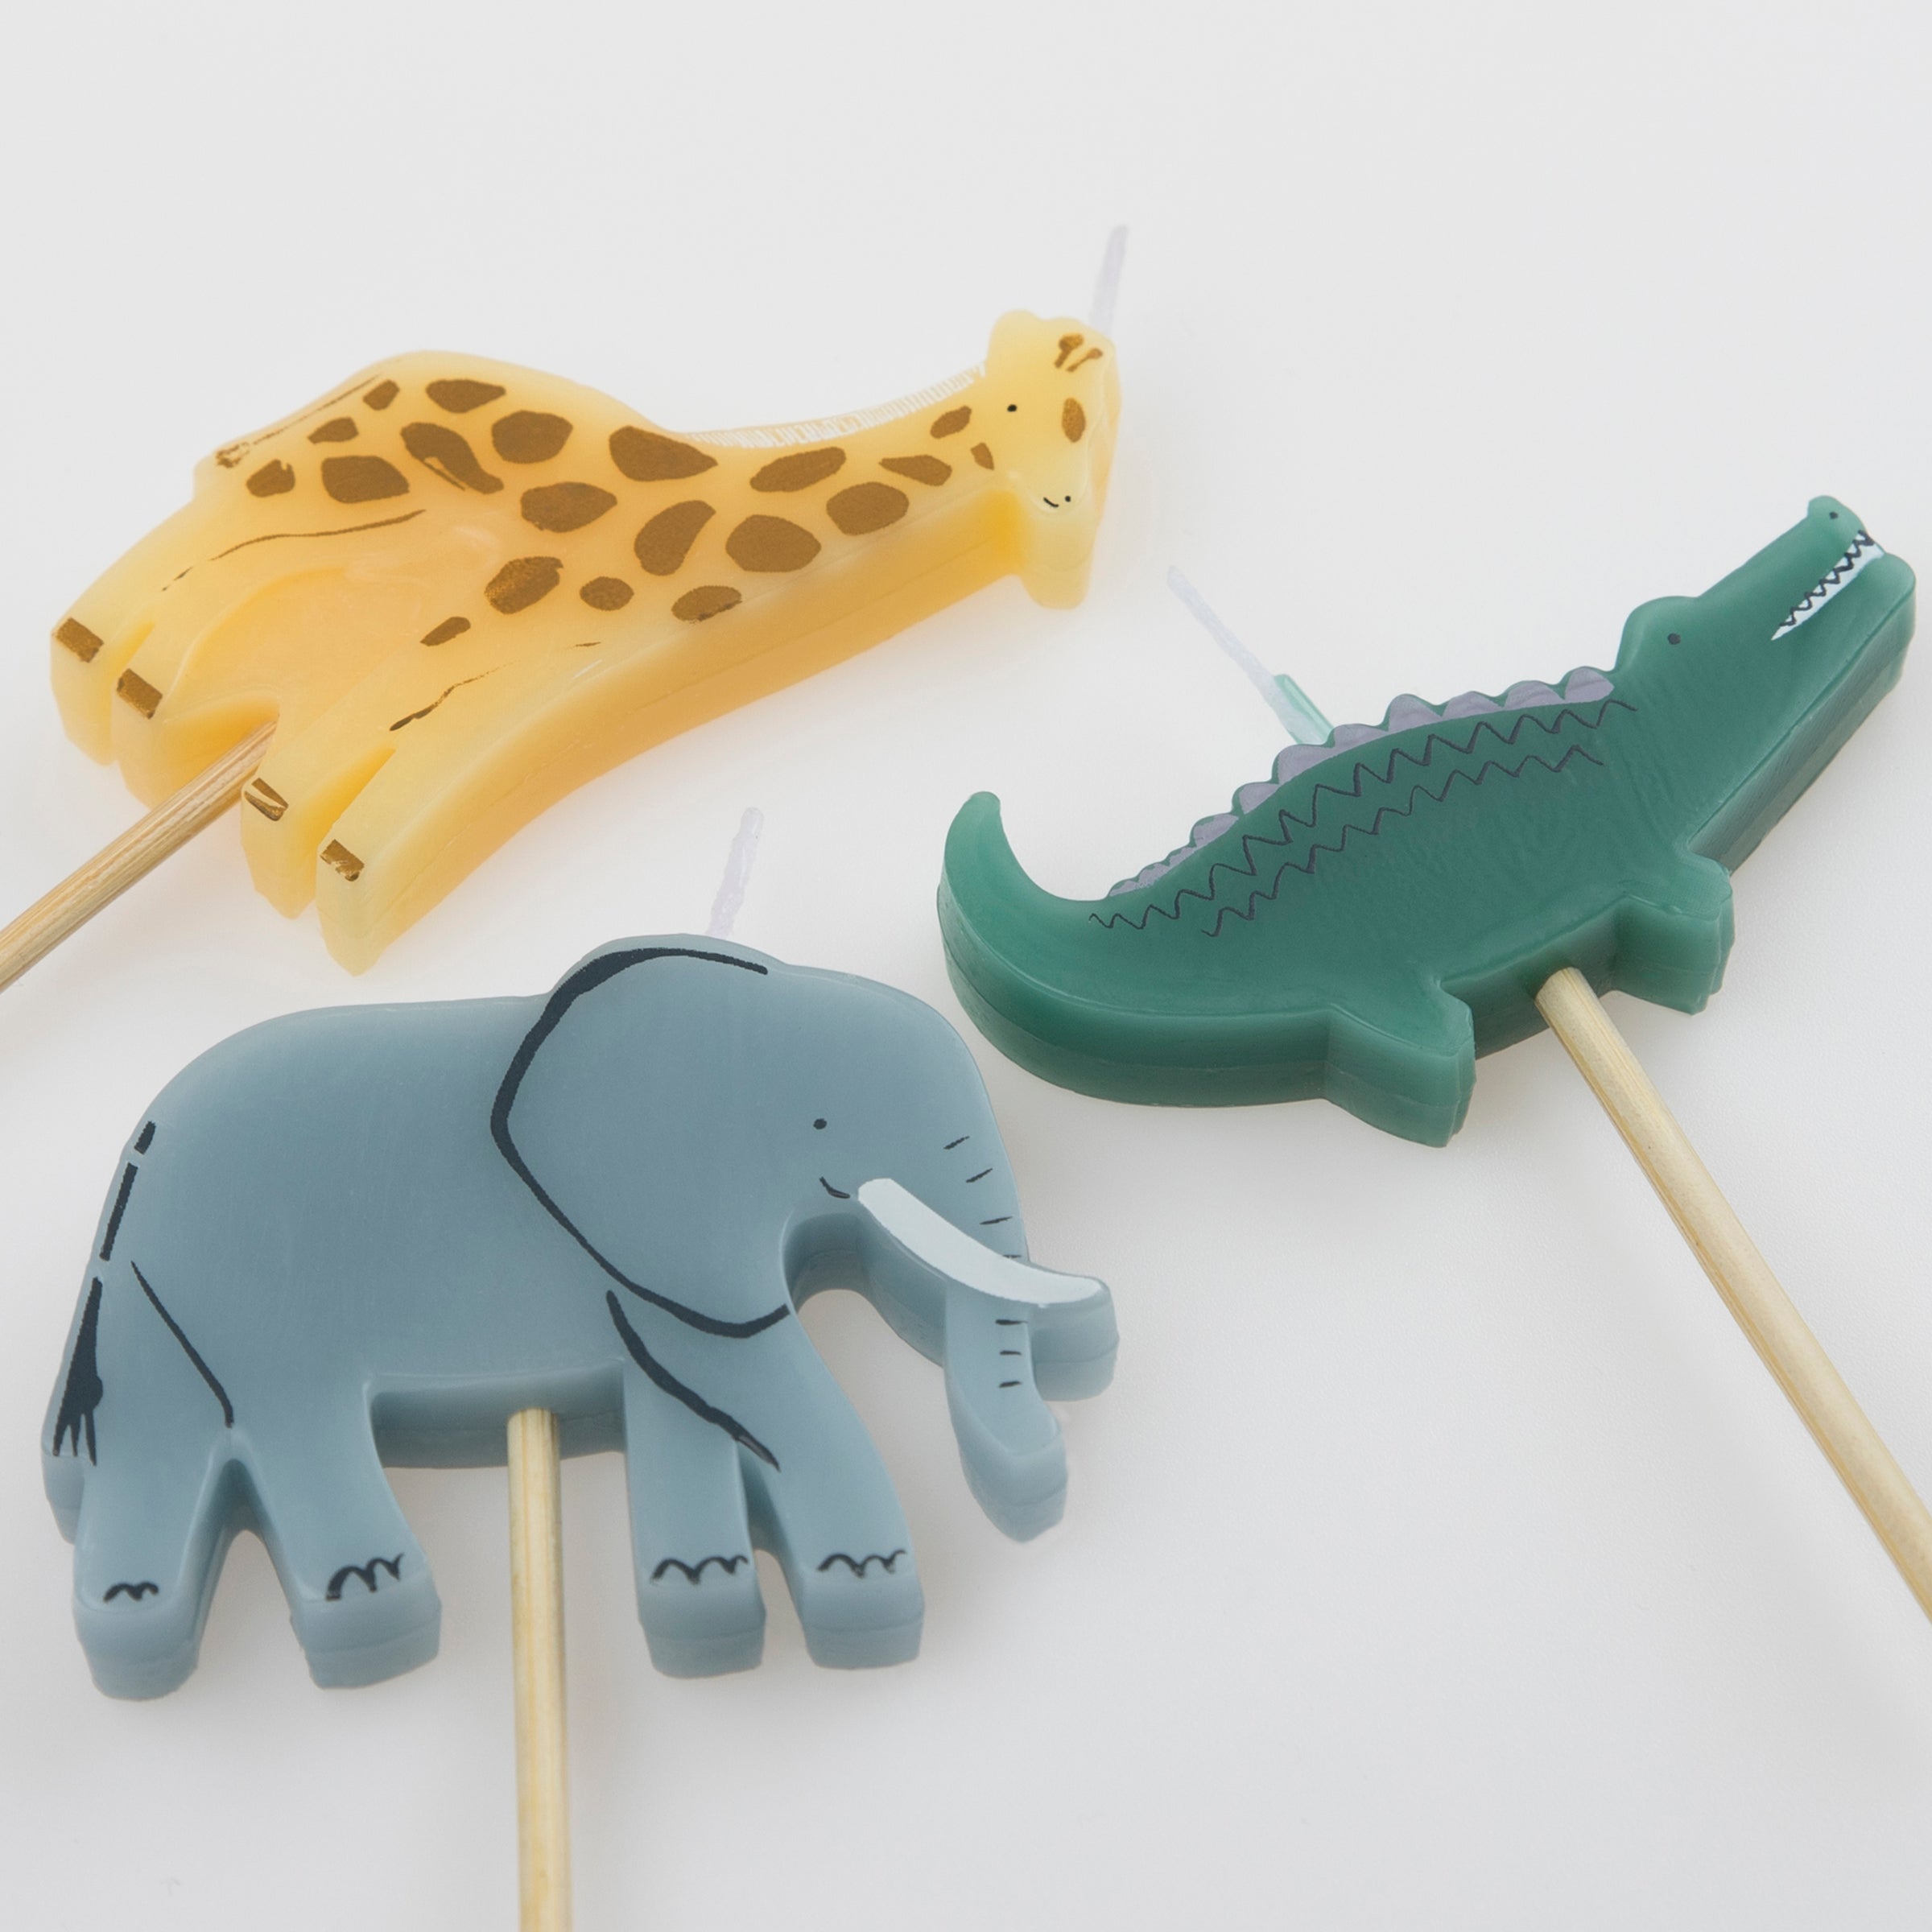 If you're looking for brightly colored birthday candles you'll love our animal candles including an elephant candle.